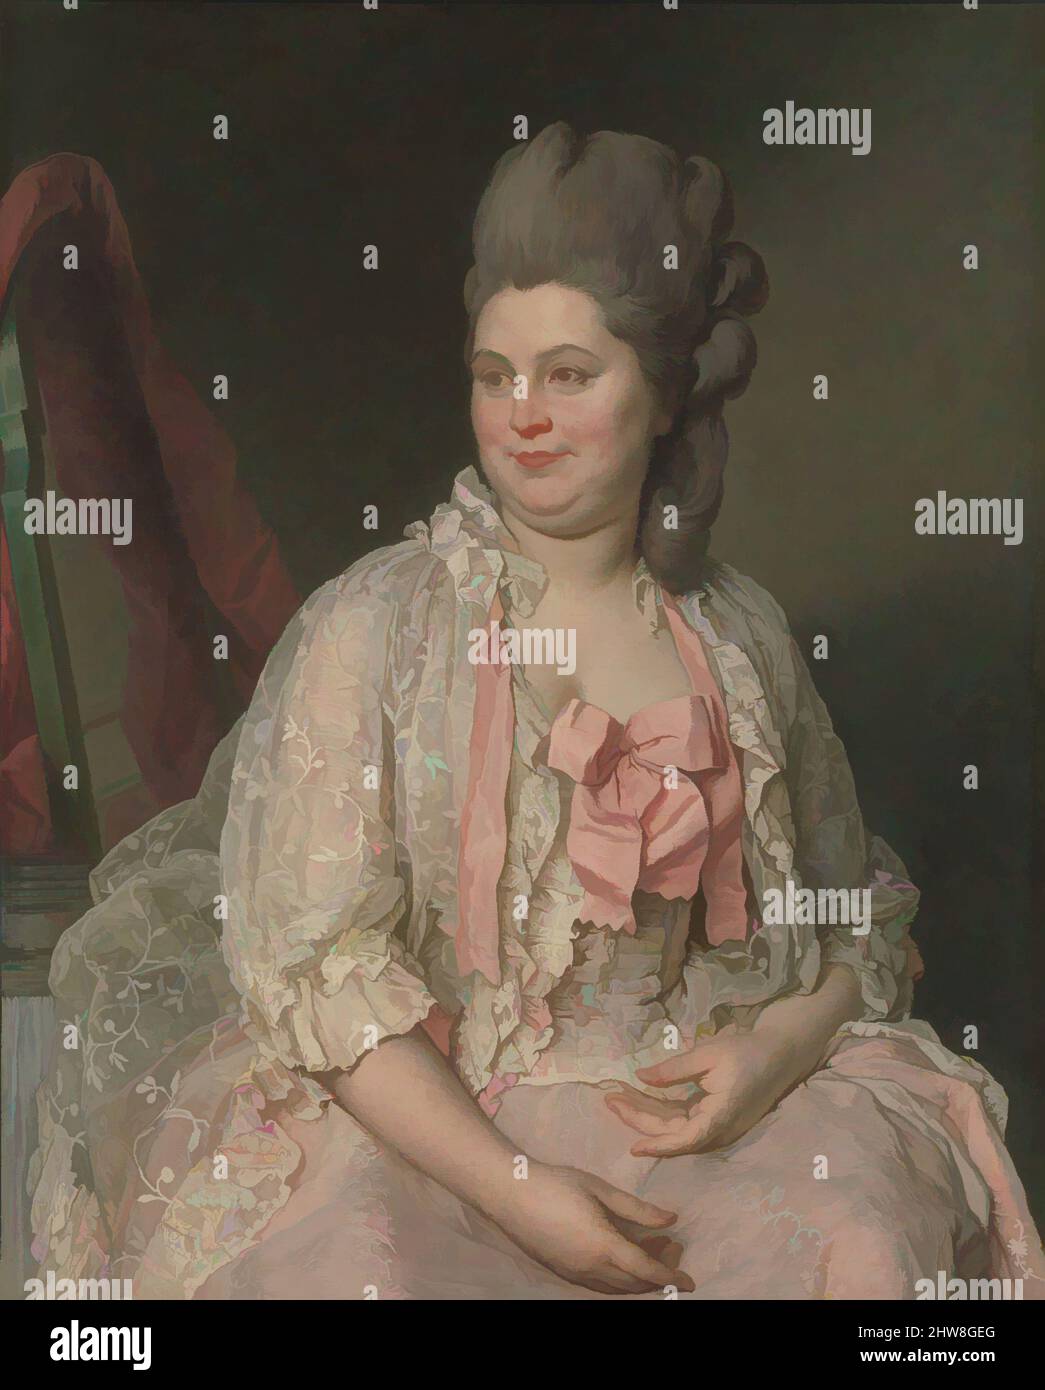 Art inspired by Madame de Saint-Maurice, 1776, Oil on canvas, 39 1/2 x 31 7/8 in. (100.3 x 81 cm), Paintings, Joseph Siffred Duplessis (French, Carpentras 1725–1802 Versailles), The picture was exhibited by Duplessis at the Salon of 1777, where it was admired for its truthfulness and, Classic works modernized by Artotop with a splash of modernity. Shapes, color and value, eye-catching visual impact on art. Emotions through freedom of artworks in a contemporary way. A timeless message pursuing a wildly creative new direction. Artists turning to the digital medium and creating the Artotop NFT Stock Photo